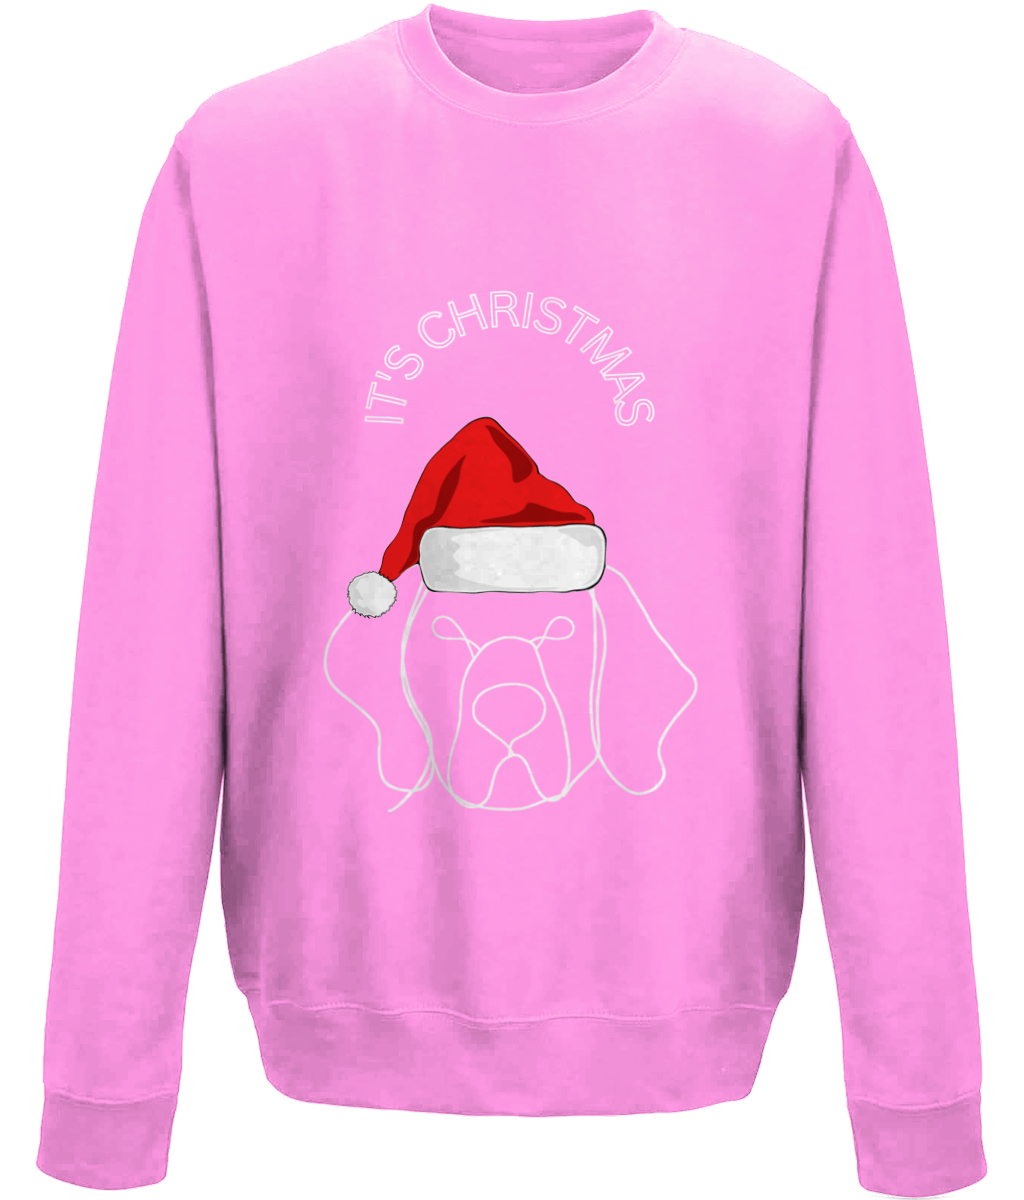 Cute Christmas Sweatshirt With A Line Art Dog Wearing a Bright Red Hat